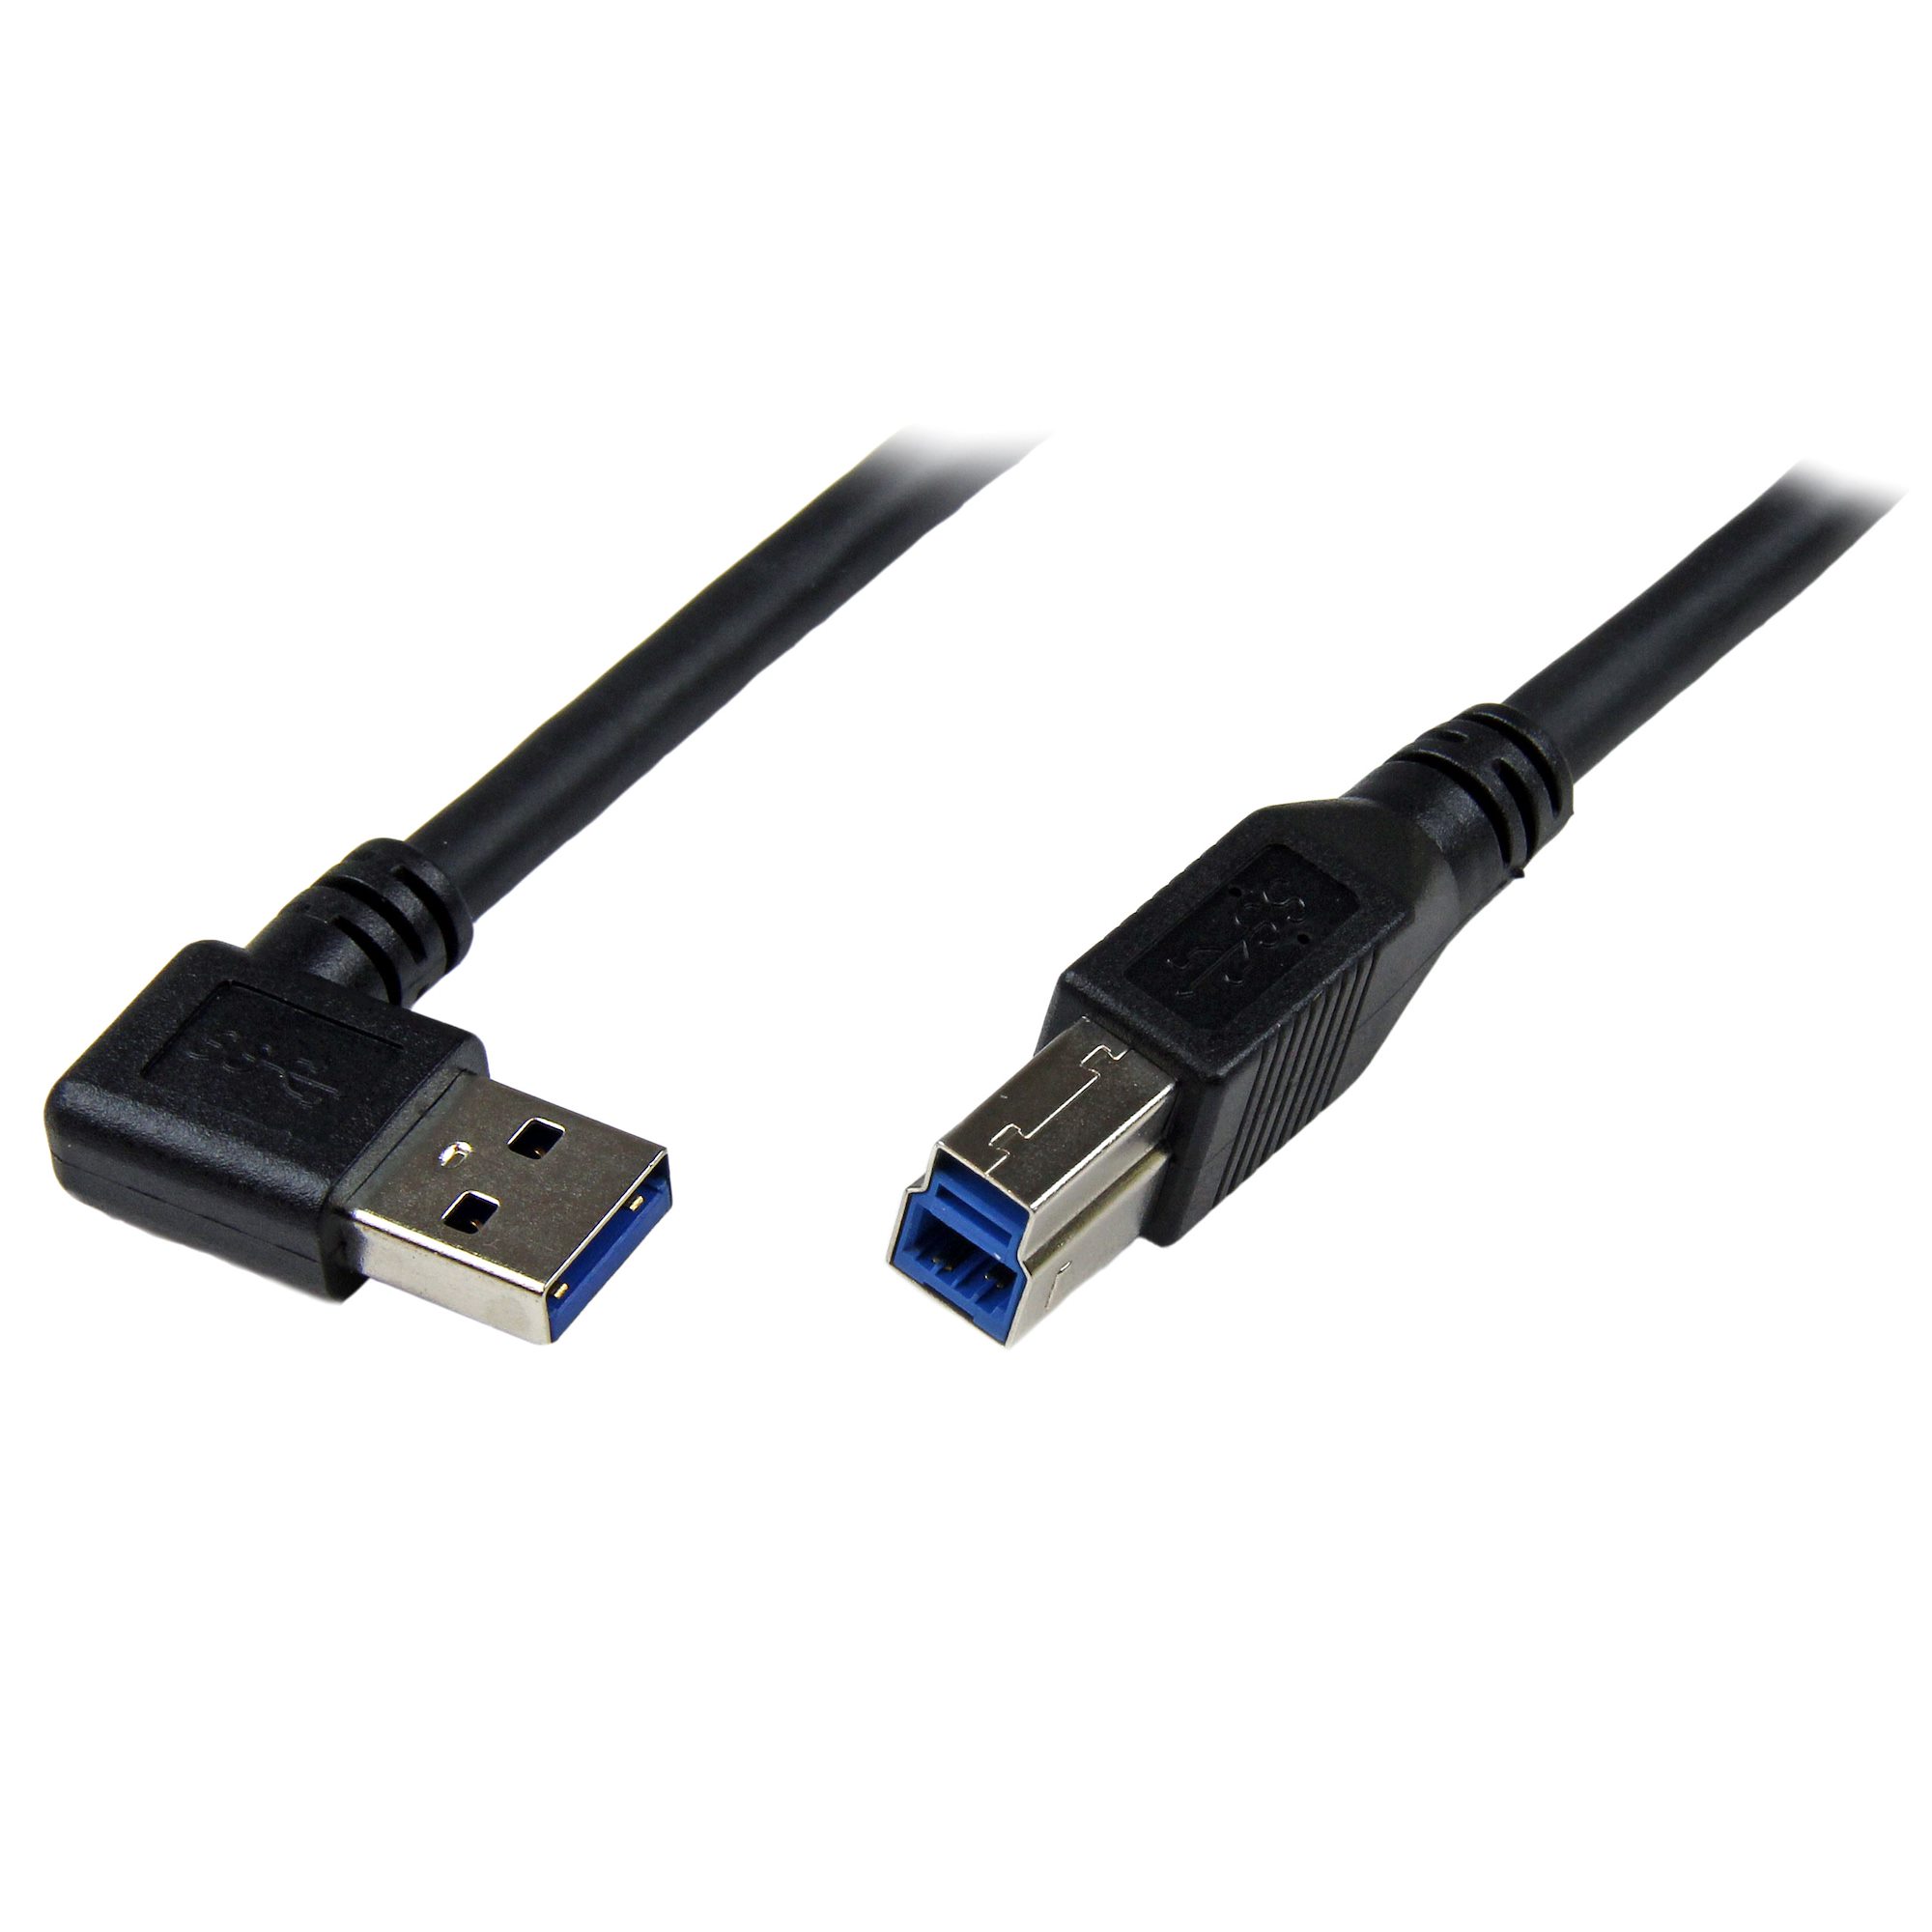 uitglijden ambulance Springplank 1m Black USB 3 Cable Right Angle A to B - USB 3.0 Cables | StarTech.com